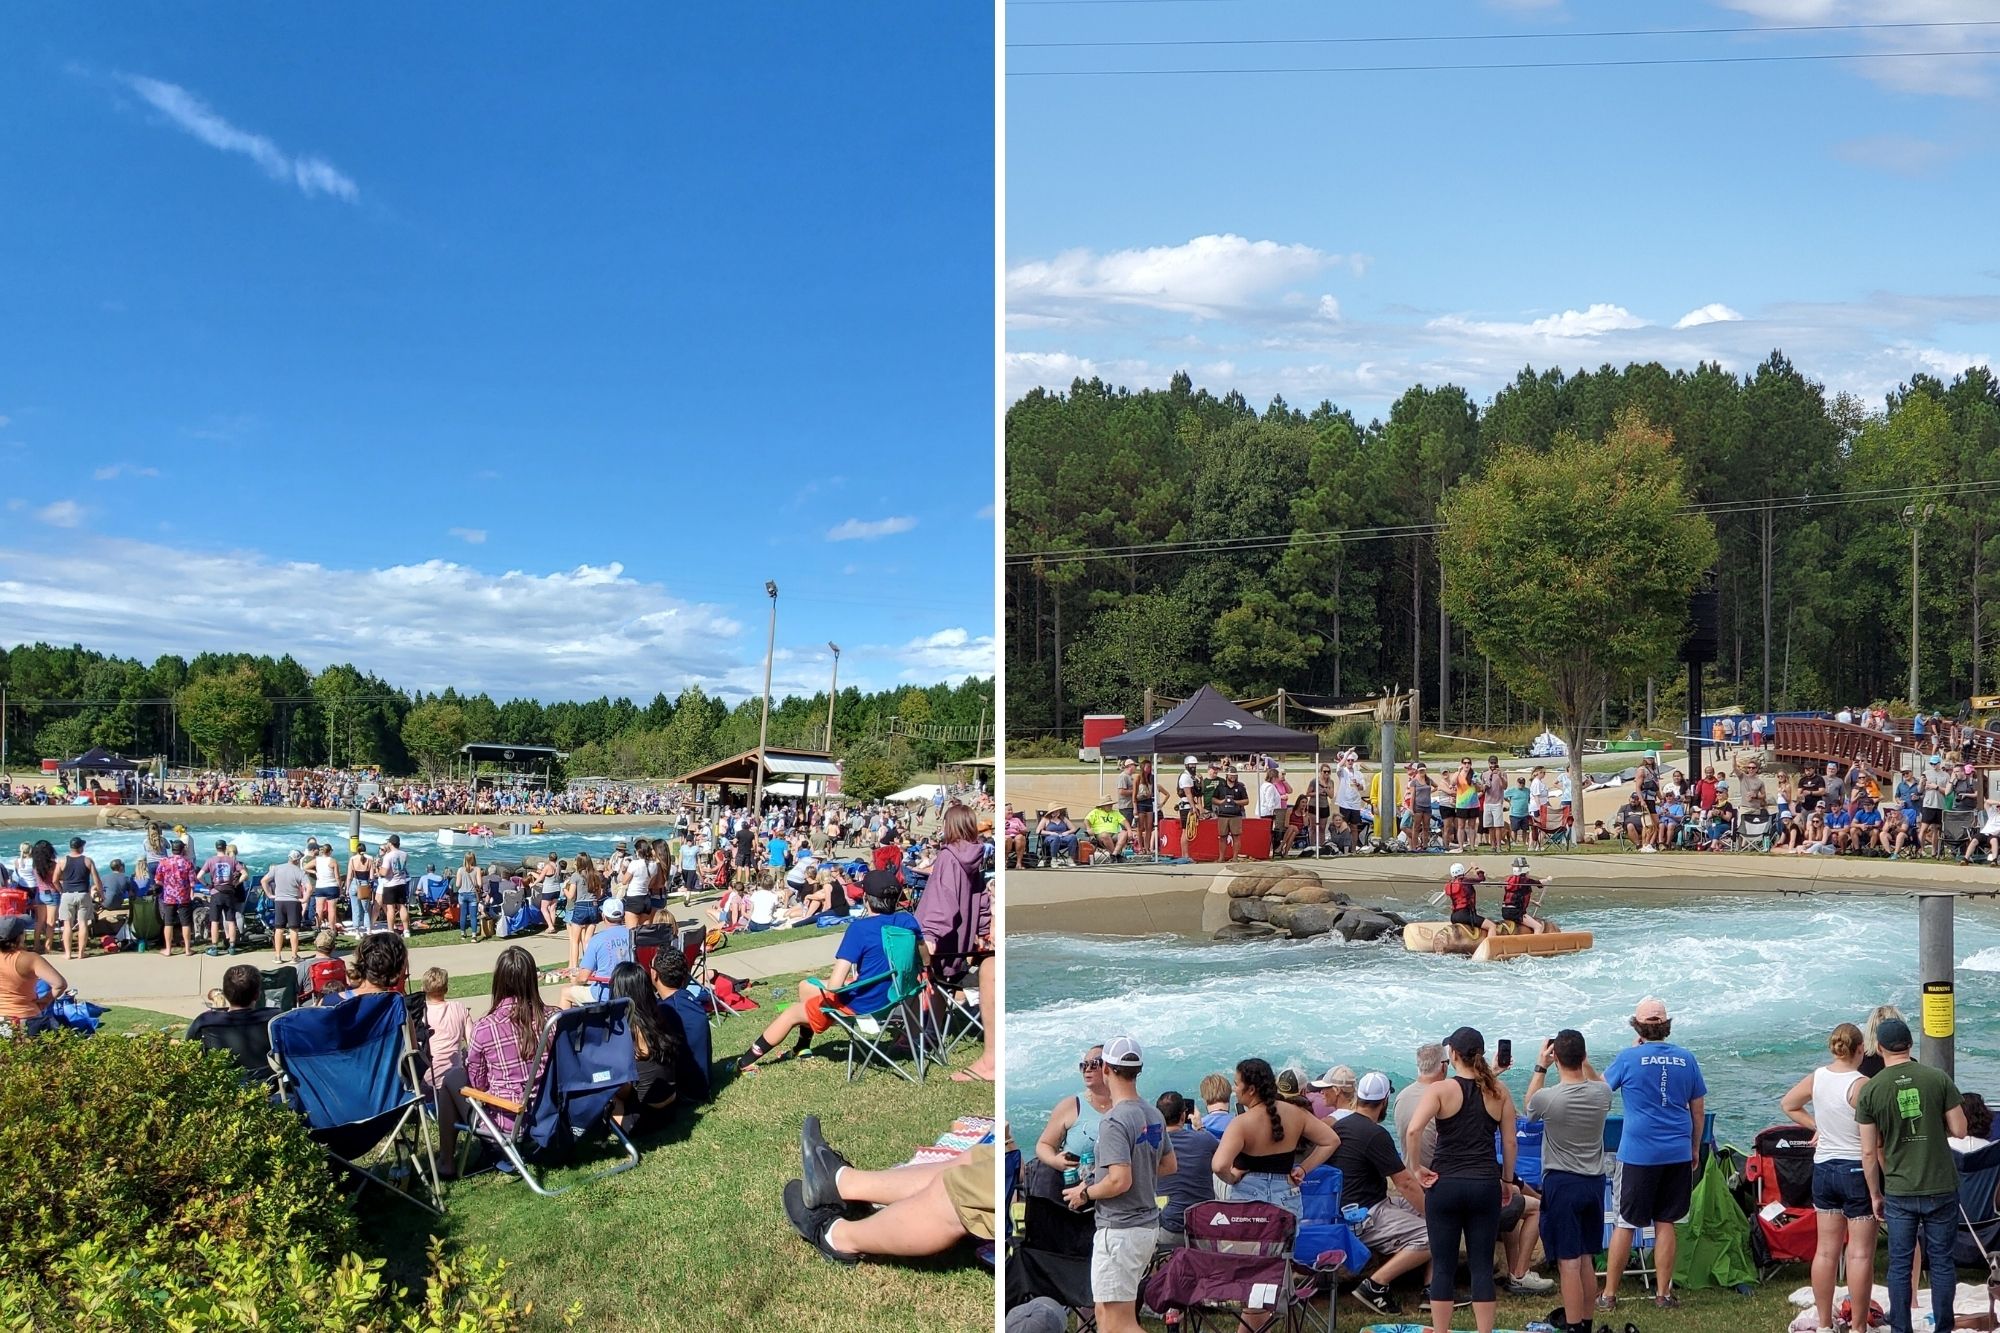 Two images of a crowd watching the Build Your Own Boat at the Whitewater Center. One boat is a white rectangular vessel, and the other looks like a hot dog.